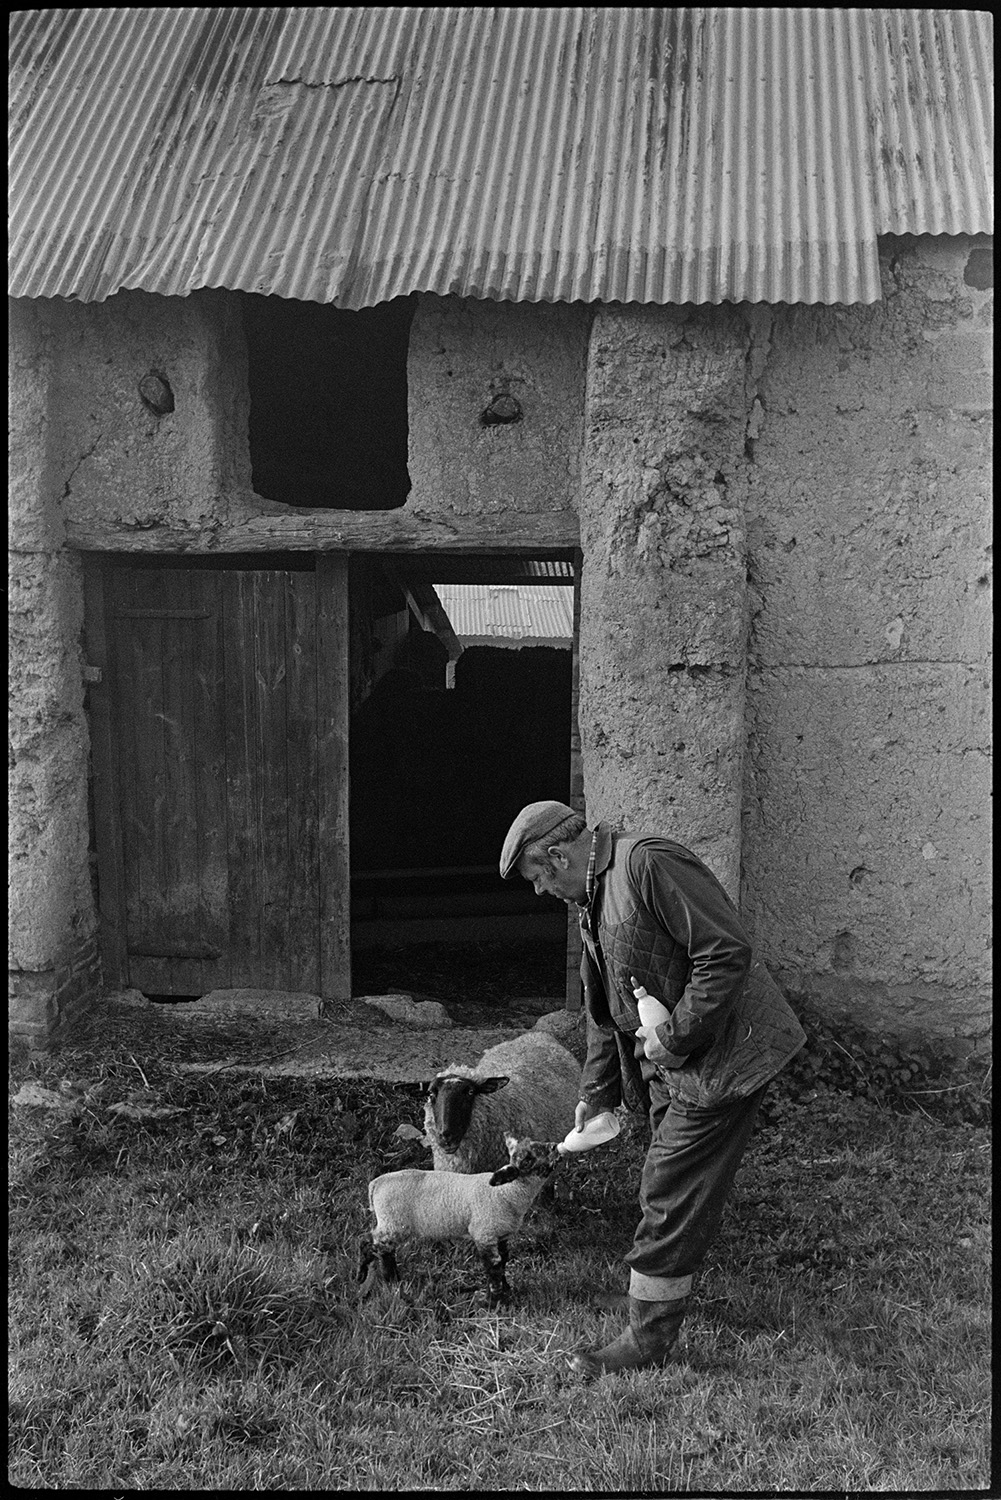 Shepherd feeding lambs beside cob and thatch barn.
[John Moyes bottle feeding a lamb, with the mother watching, in front of the entrance to a cob barn with a corrugated iron roof, at Brookland Farm, Chulmleigh.]